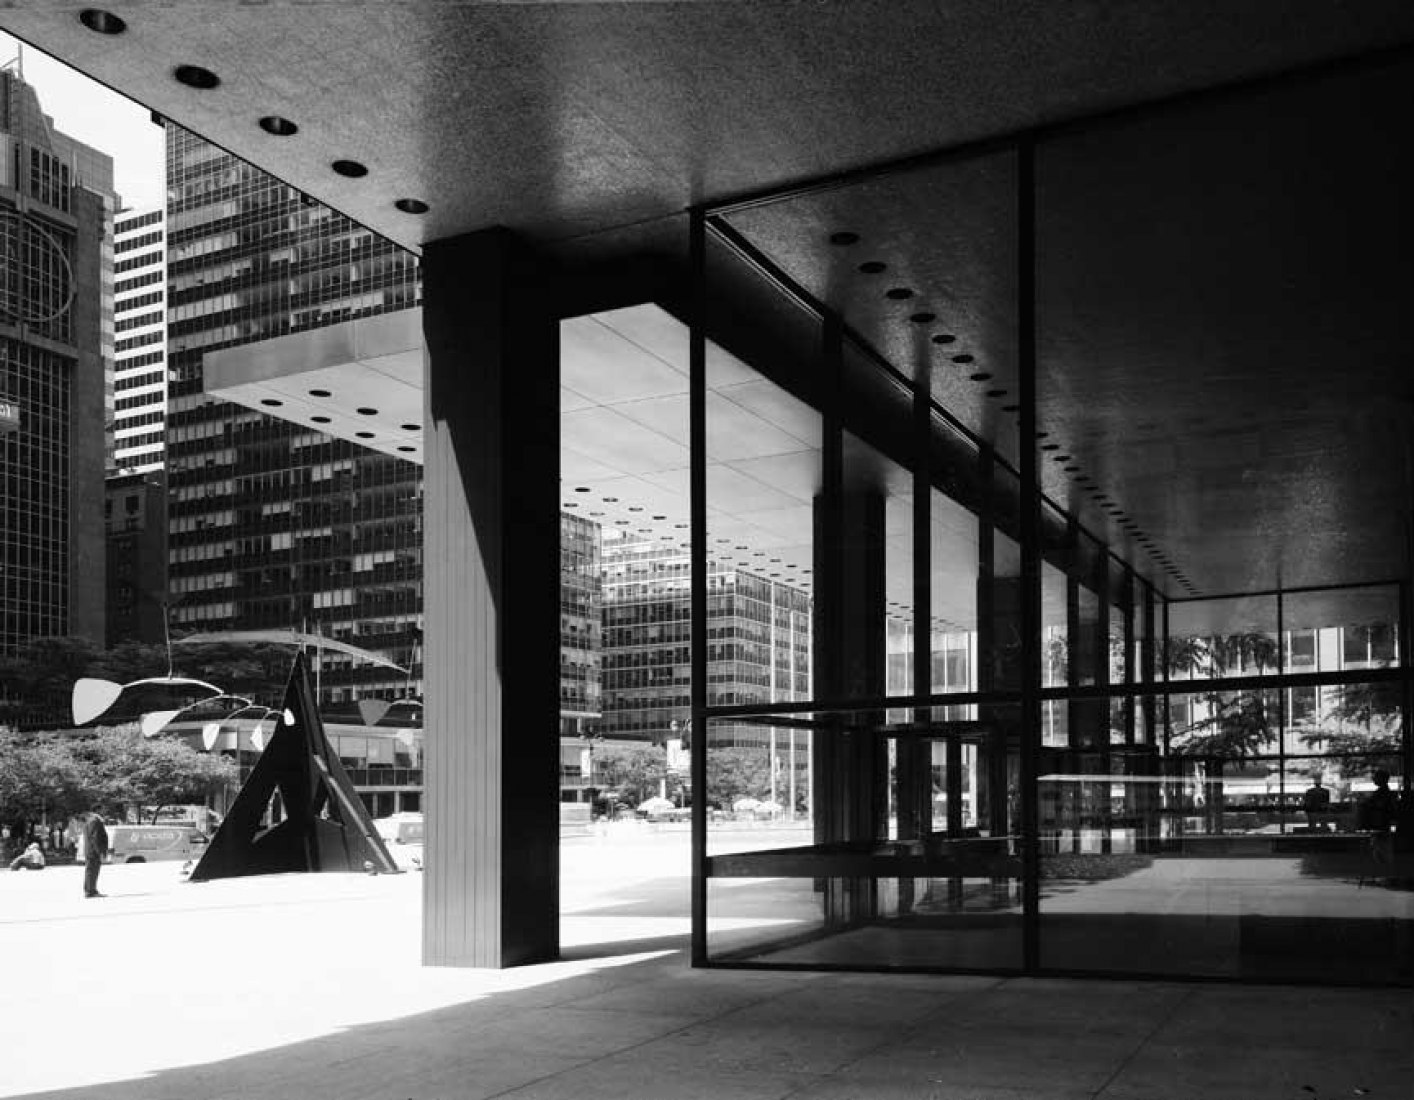 Seagram building by Mies van der Rohe  in association with Philip Johnson. Image courtesy of RFR